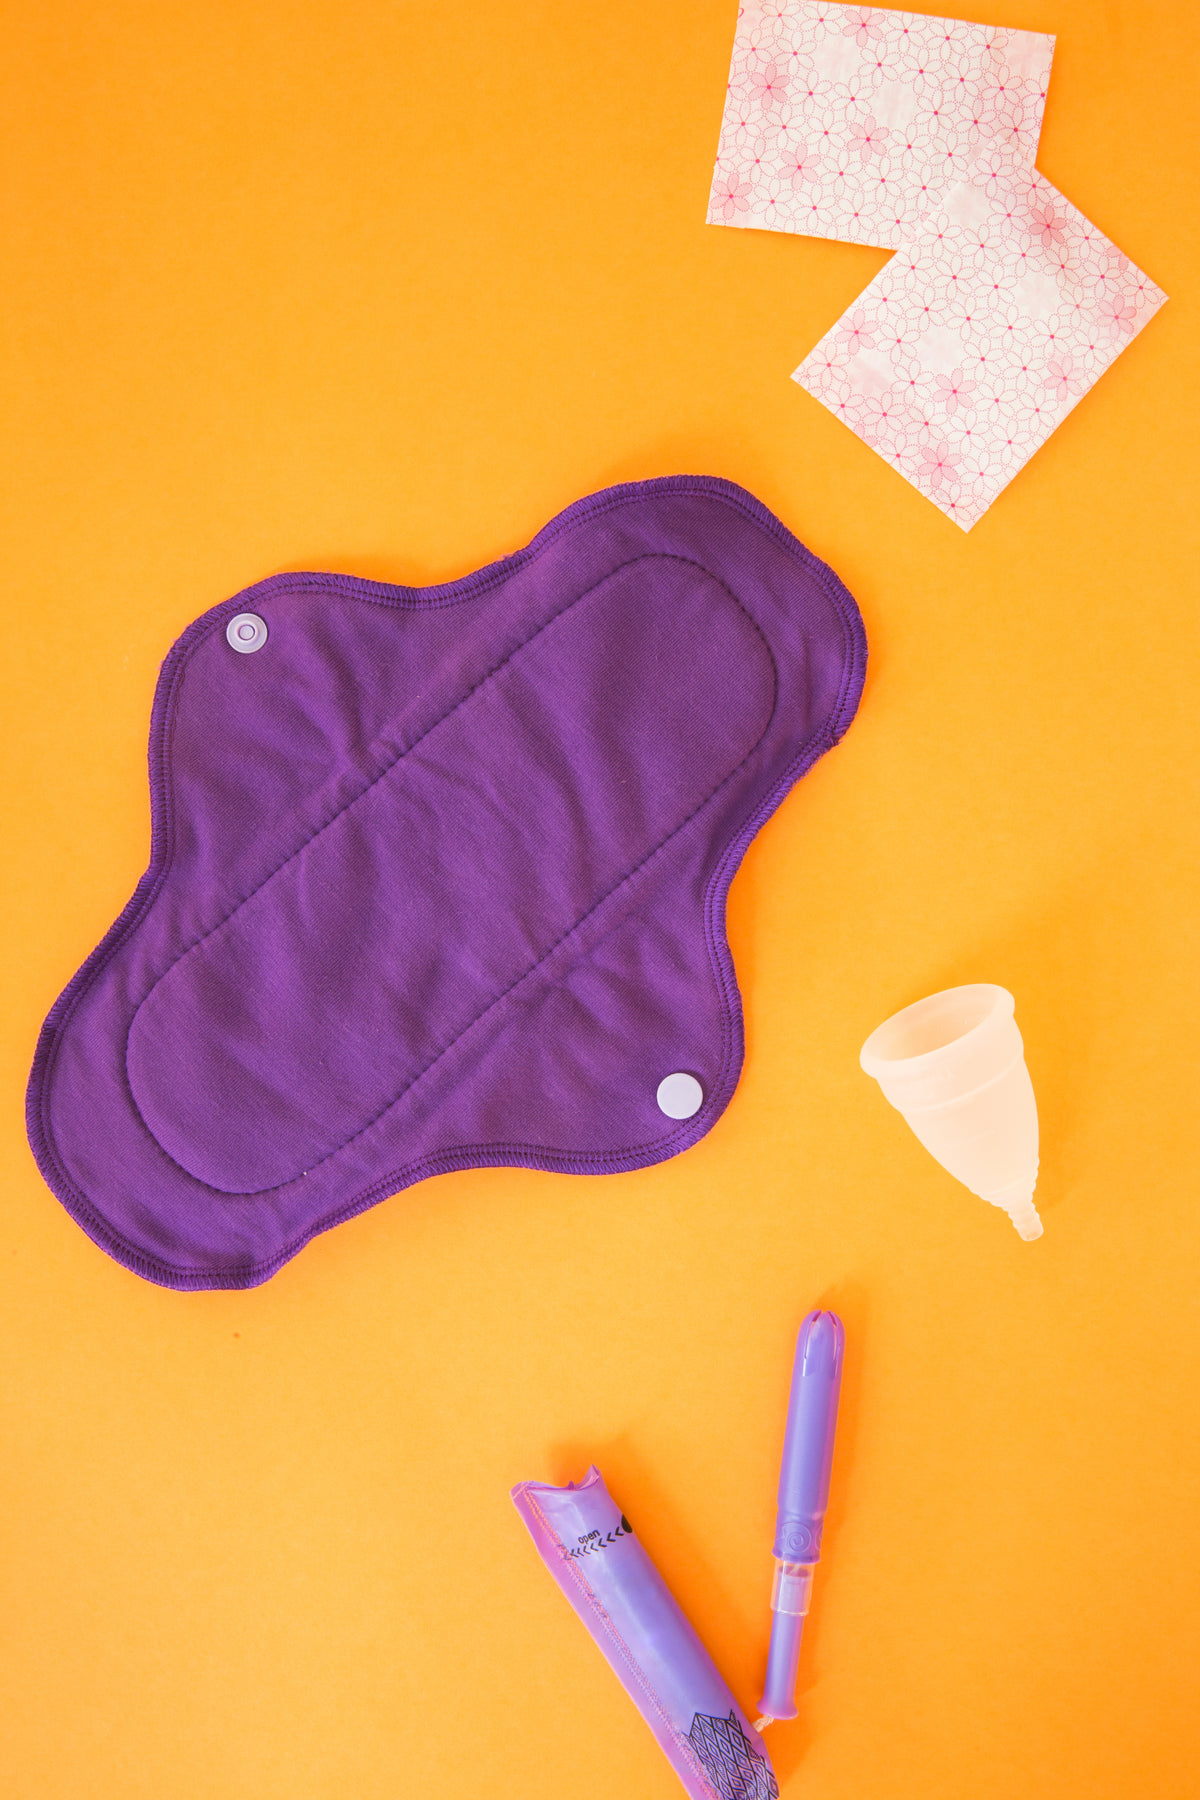 a purple reusable menstrual pad, cup and applicator